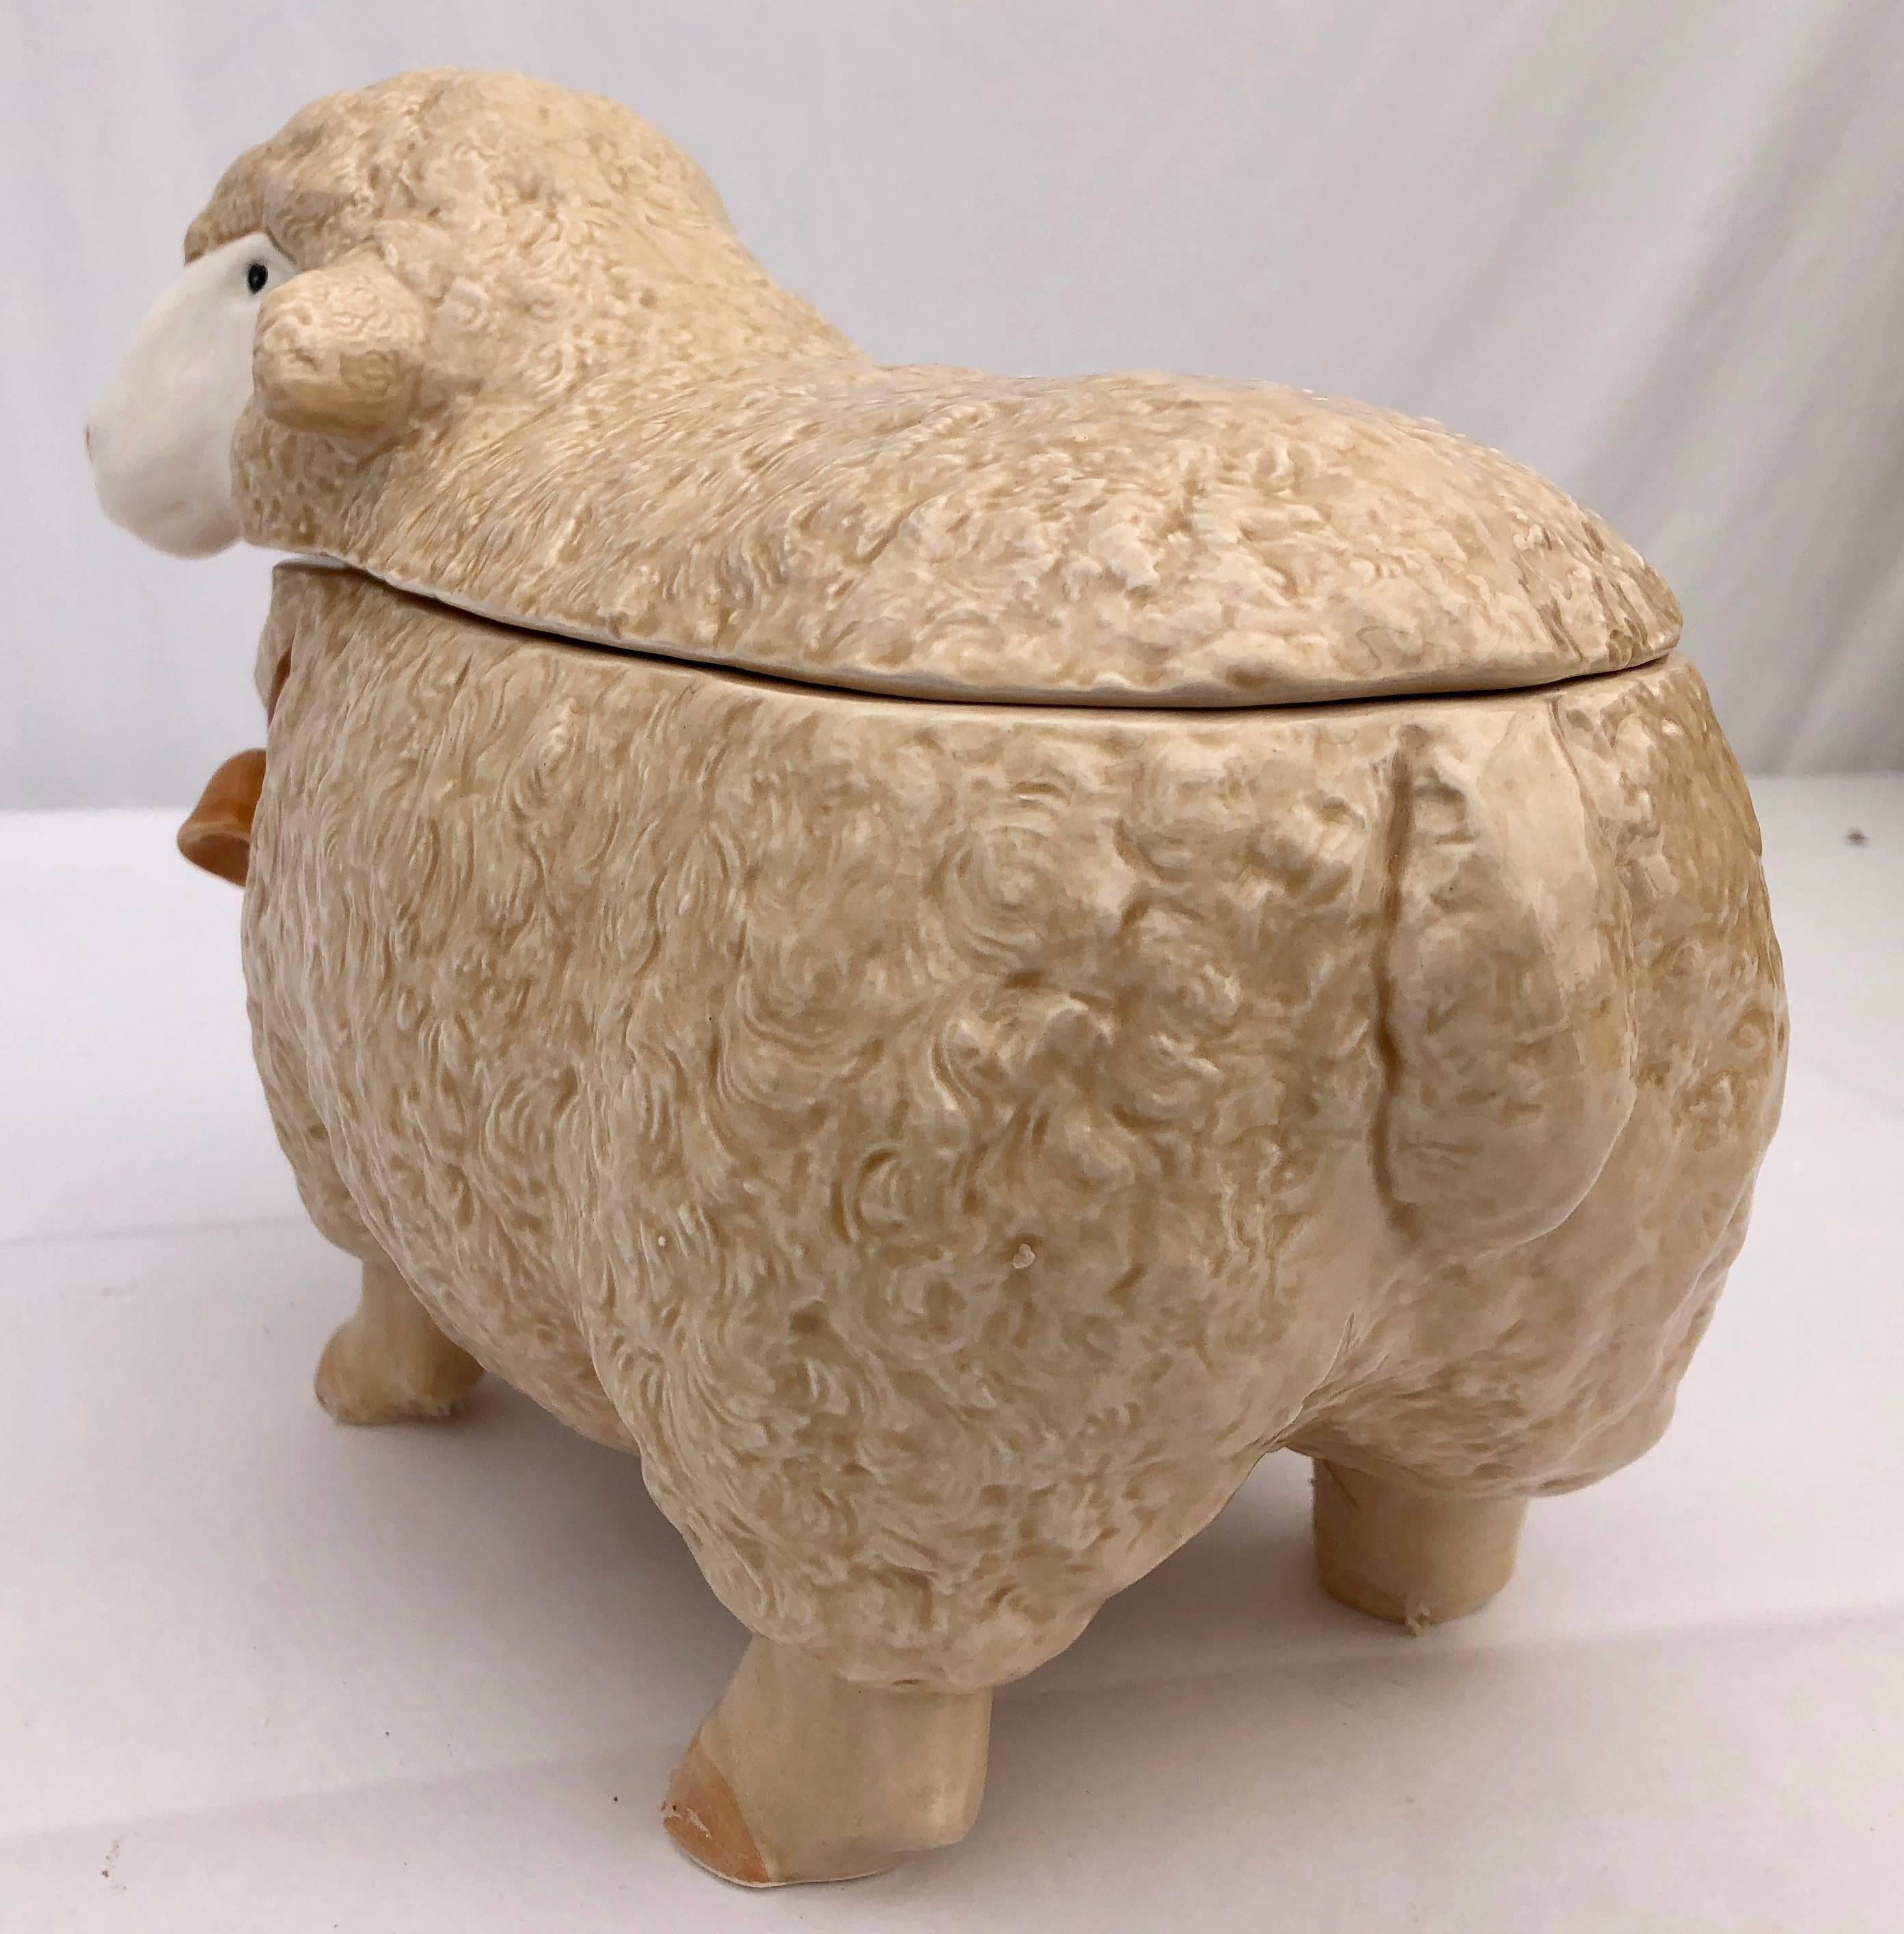 This is a fun handcrafted ceramic sheep cookie jar, by Otagiri, Japan. The details from the face are great. It was purchased for a French restaurant, but never used. It comes in its original box. The hand painted colors are vibrant. This would add a